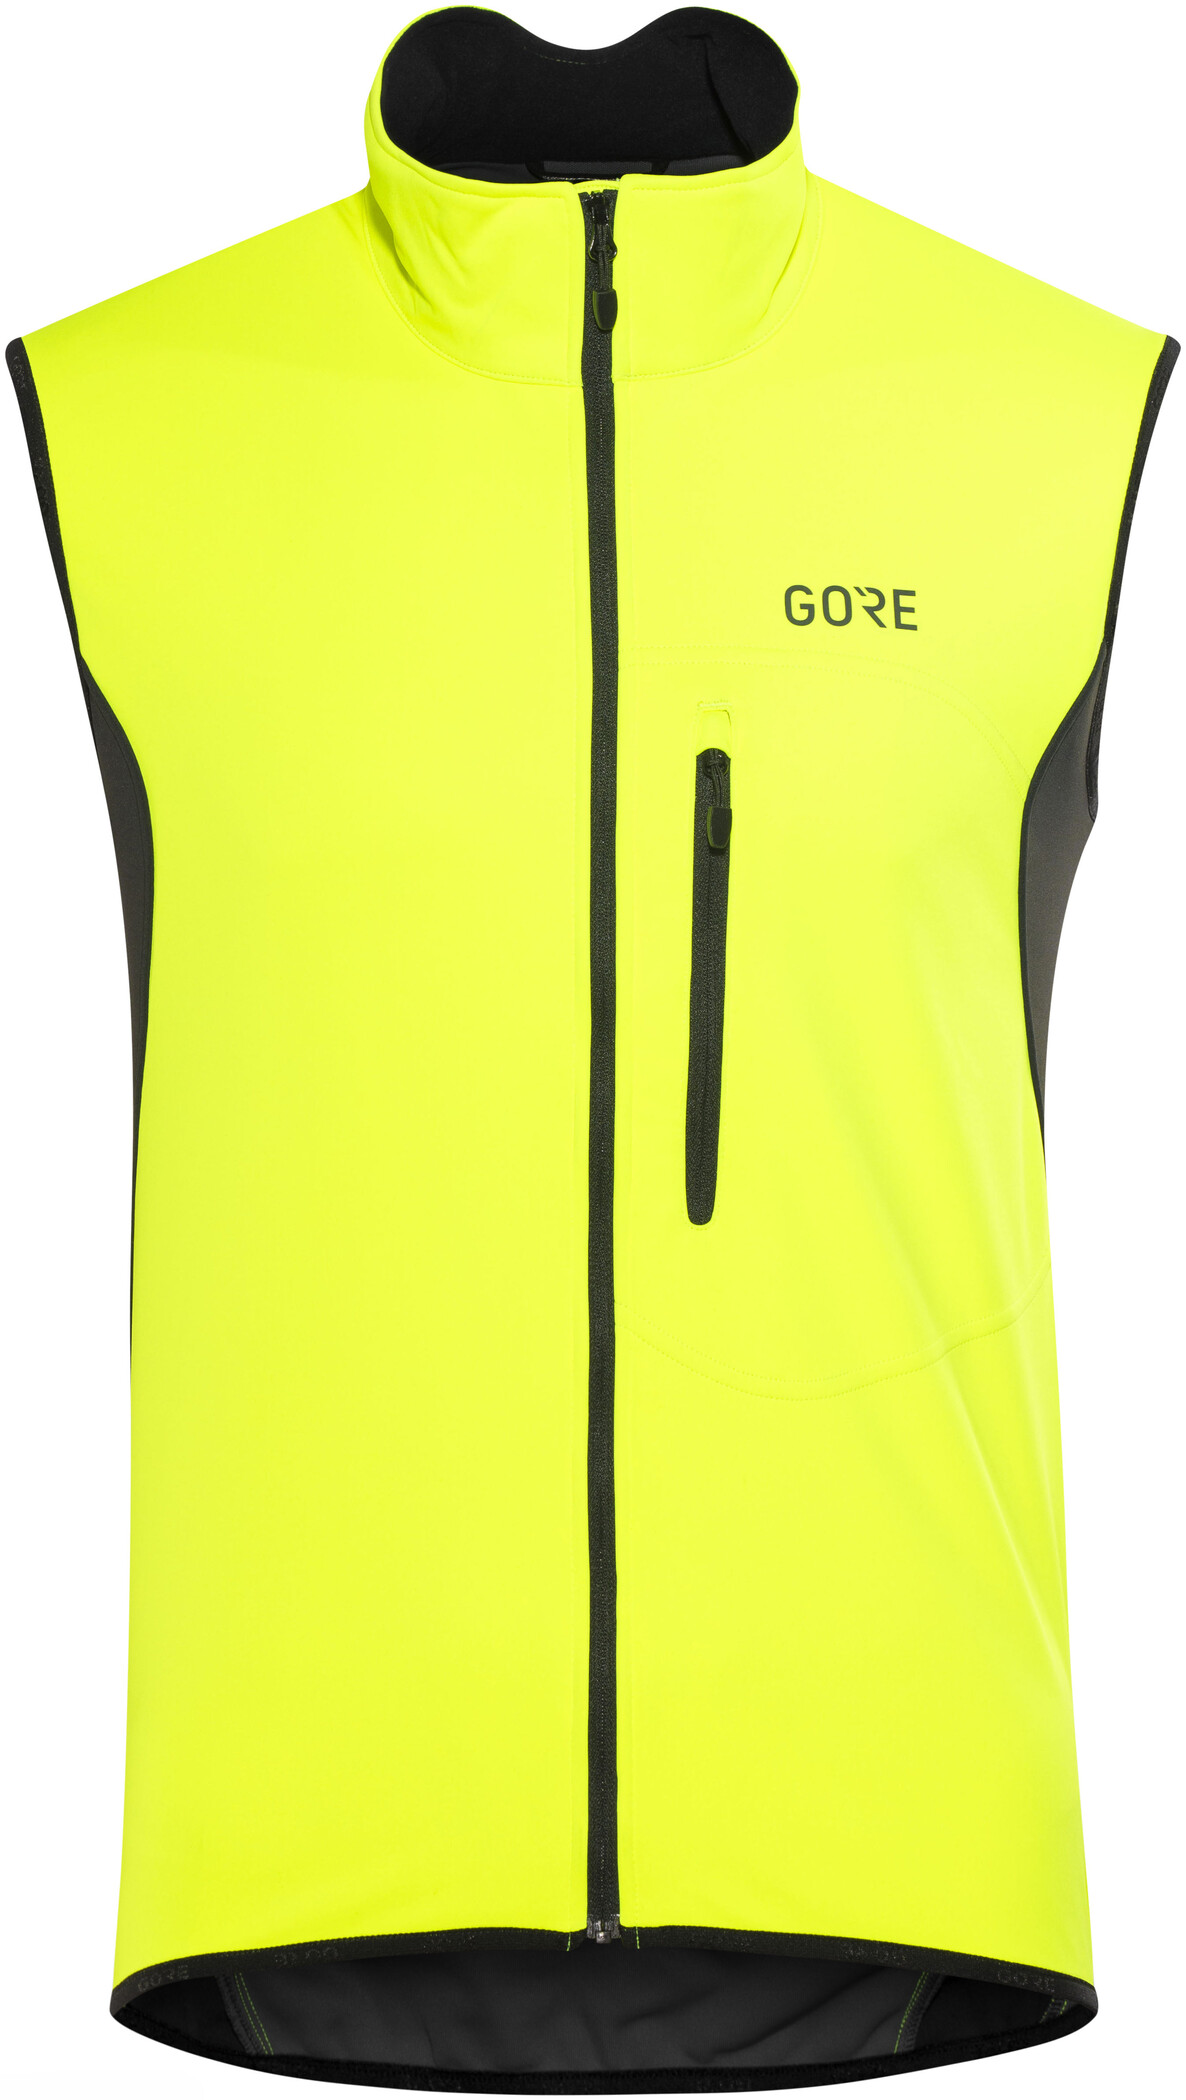 S GORE WEAR C3 GORE WINDSTOPPER Gilet Gilet Homme neon yellow/black FR Taille Fabricant: S 